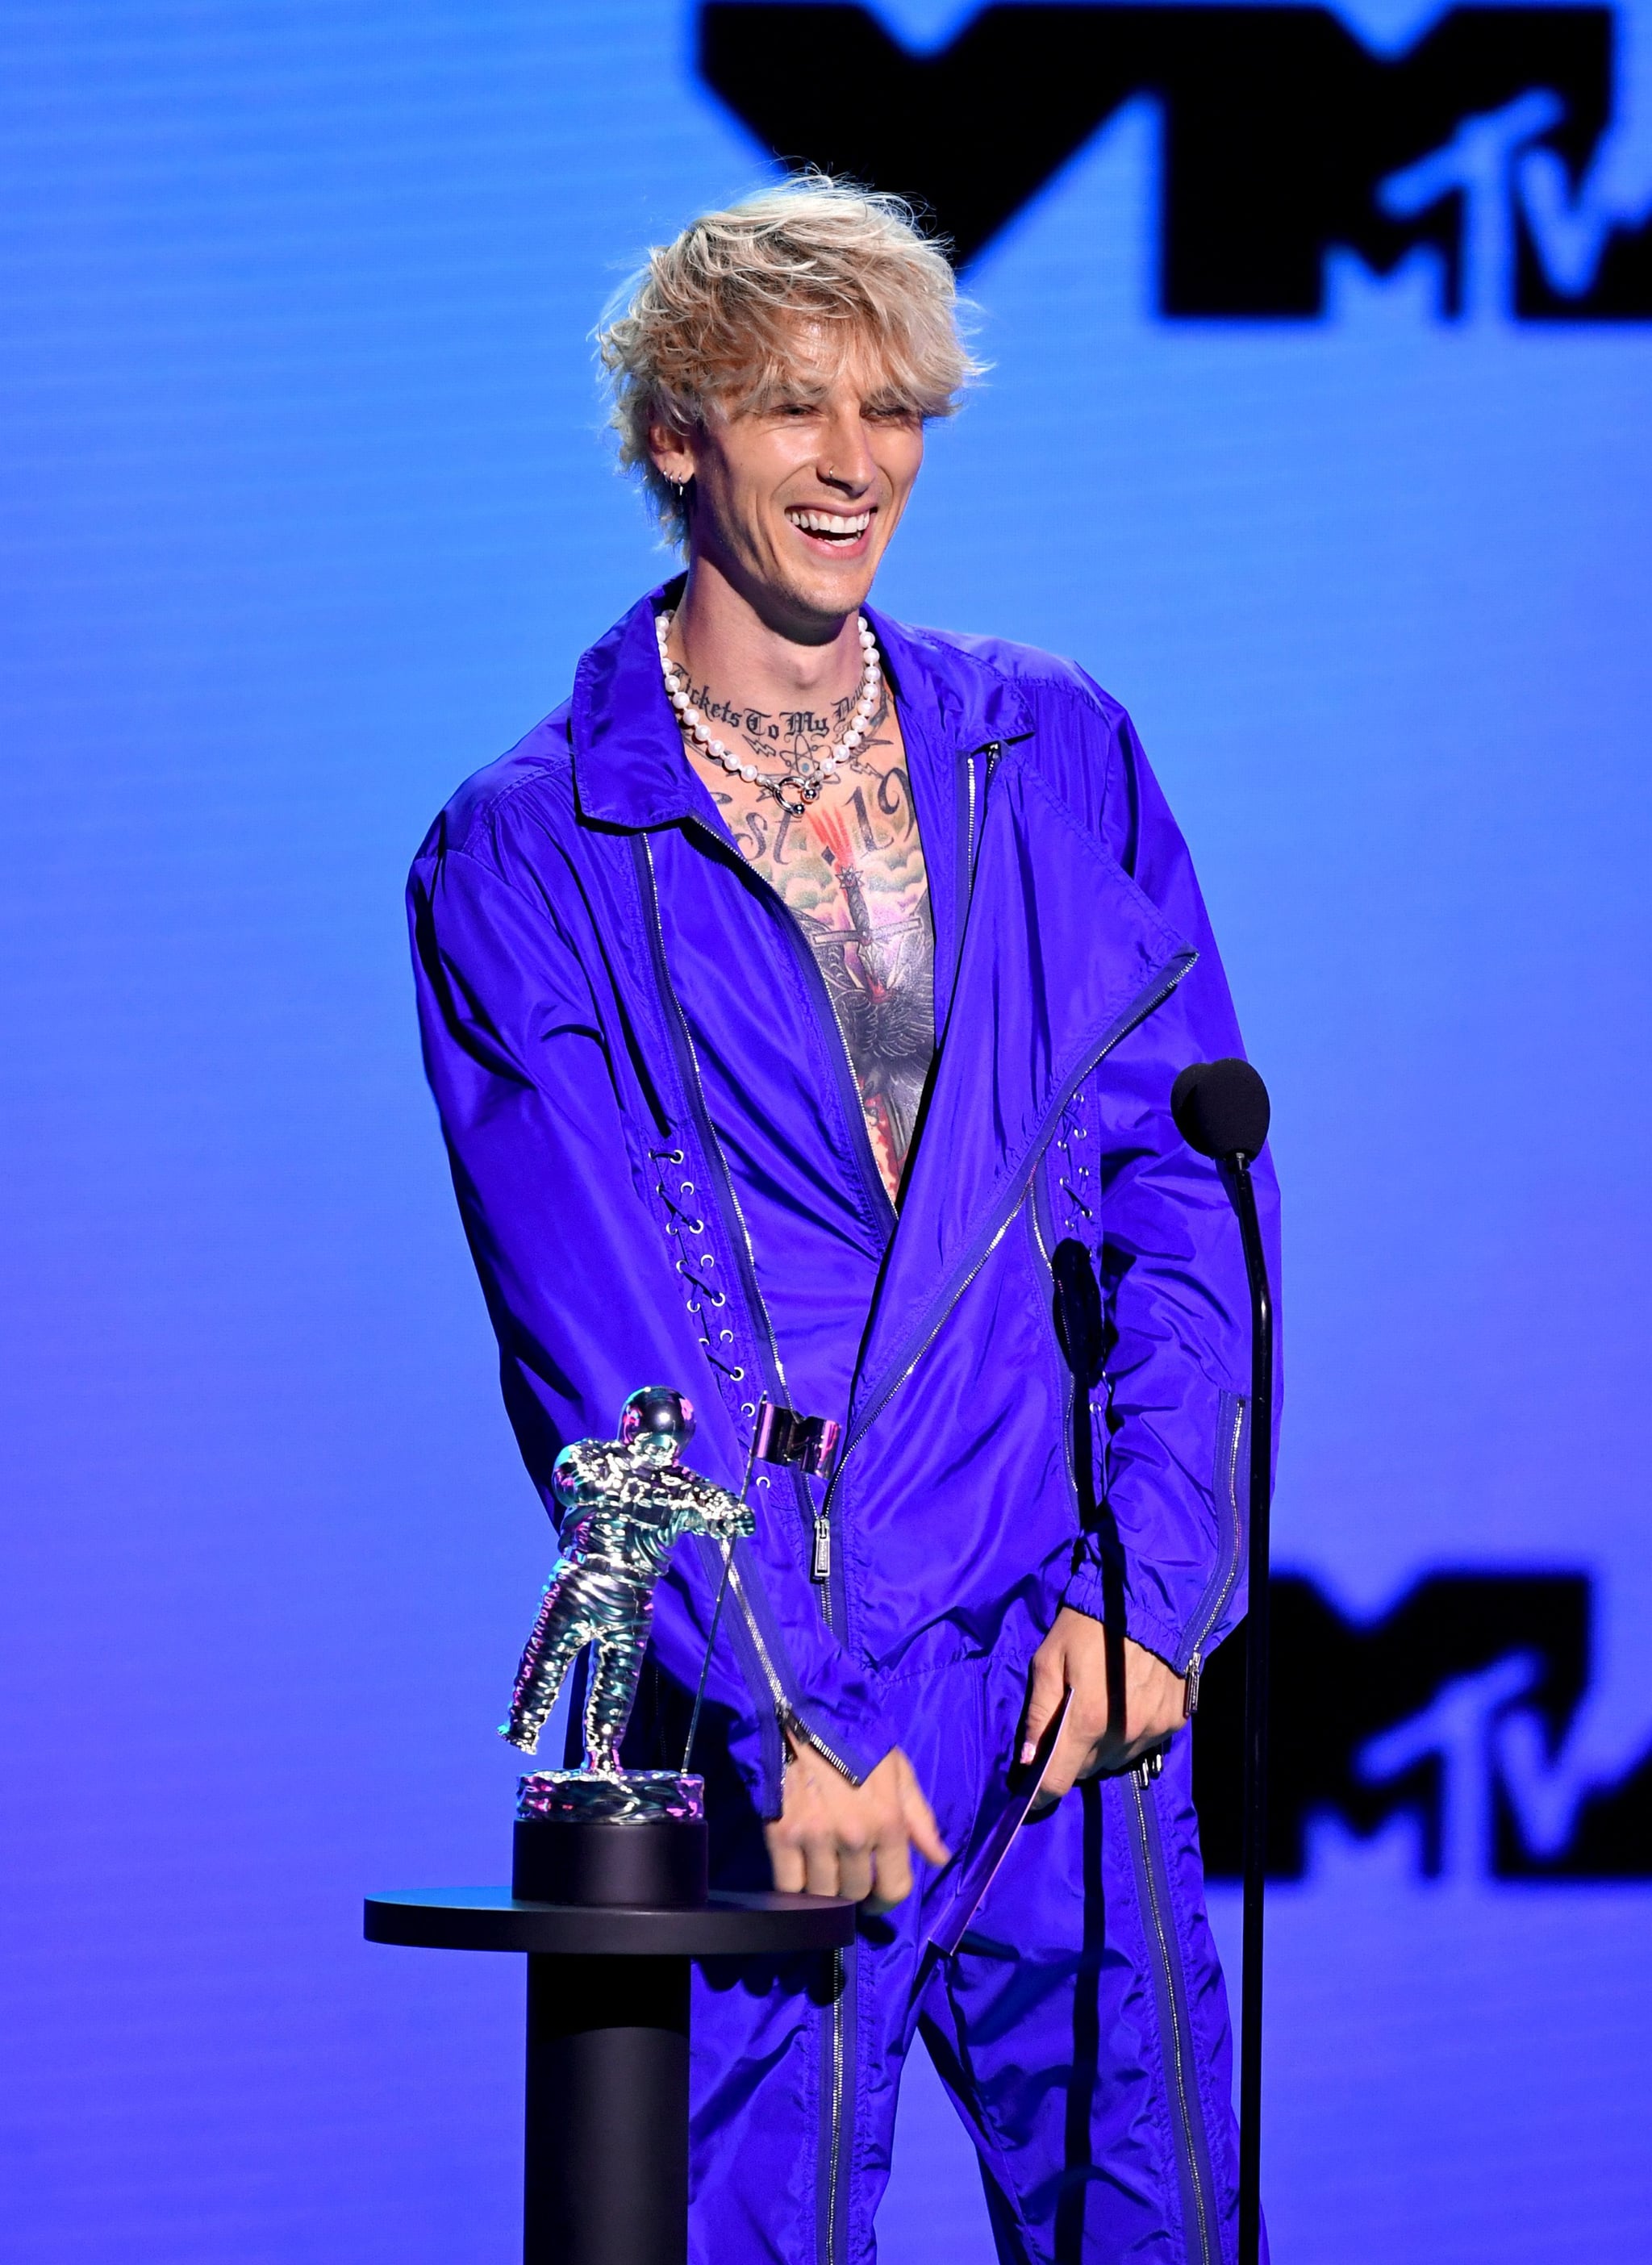 UNSPECIFIED - AUGUST 2020: Machine Gun Kelly speaks onstage during the 2020 MTV Video Music Awards, broadcast on Sunday, August 30th 2020. (Photo by Kevin Winter/MTV VMAs 2020/Getty Images for MTV)